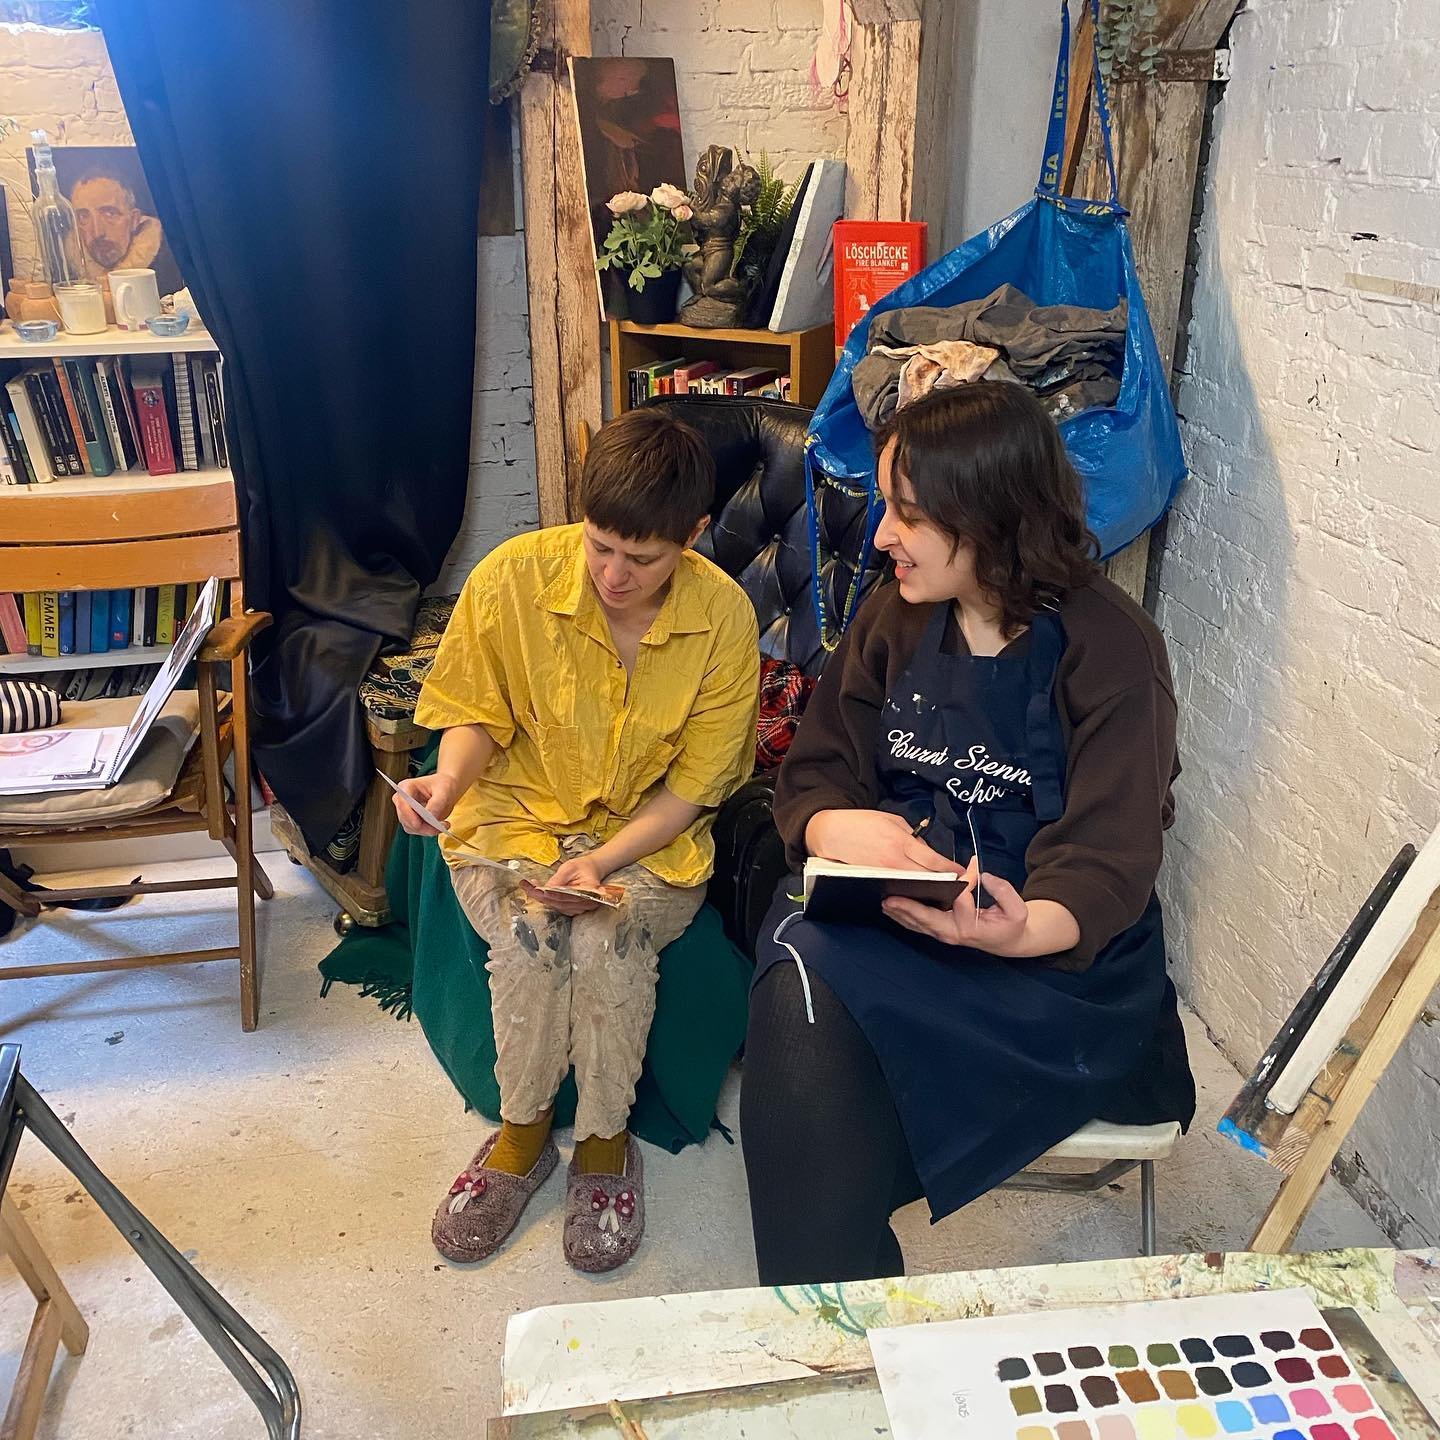 Do you want to dive into oil painting or drawing? We have the following one-day workshops available:

👩&zwj;🎨Painting the Modern Portrait in Oil - Sunday April 28th 11am-5pm

✍️A Drawing Universe - Studio Drawing Taster Day - Saturday May 11th 10am